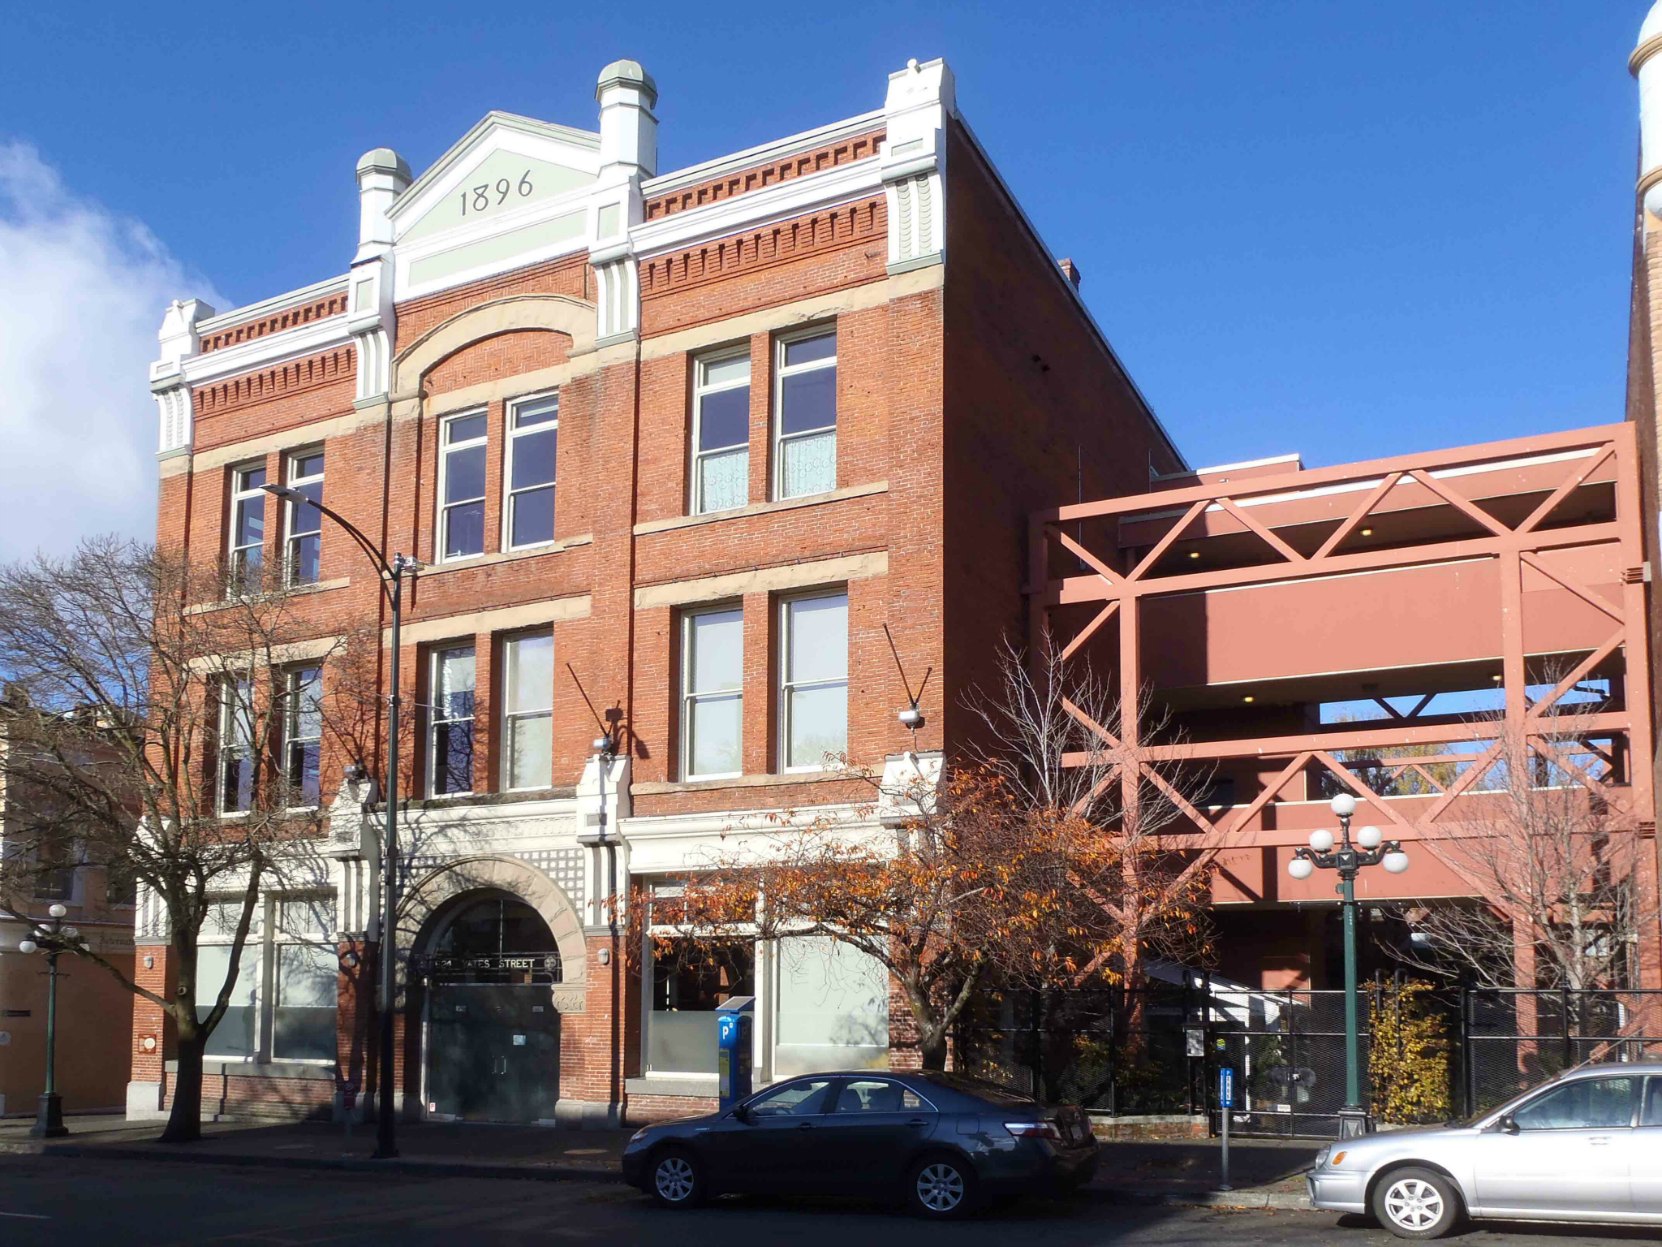 Leiser Building, 524 Yates Street. Built in 1896 as a warehouse for Simon Leiser's wholesale grocery business.